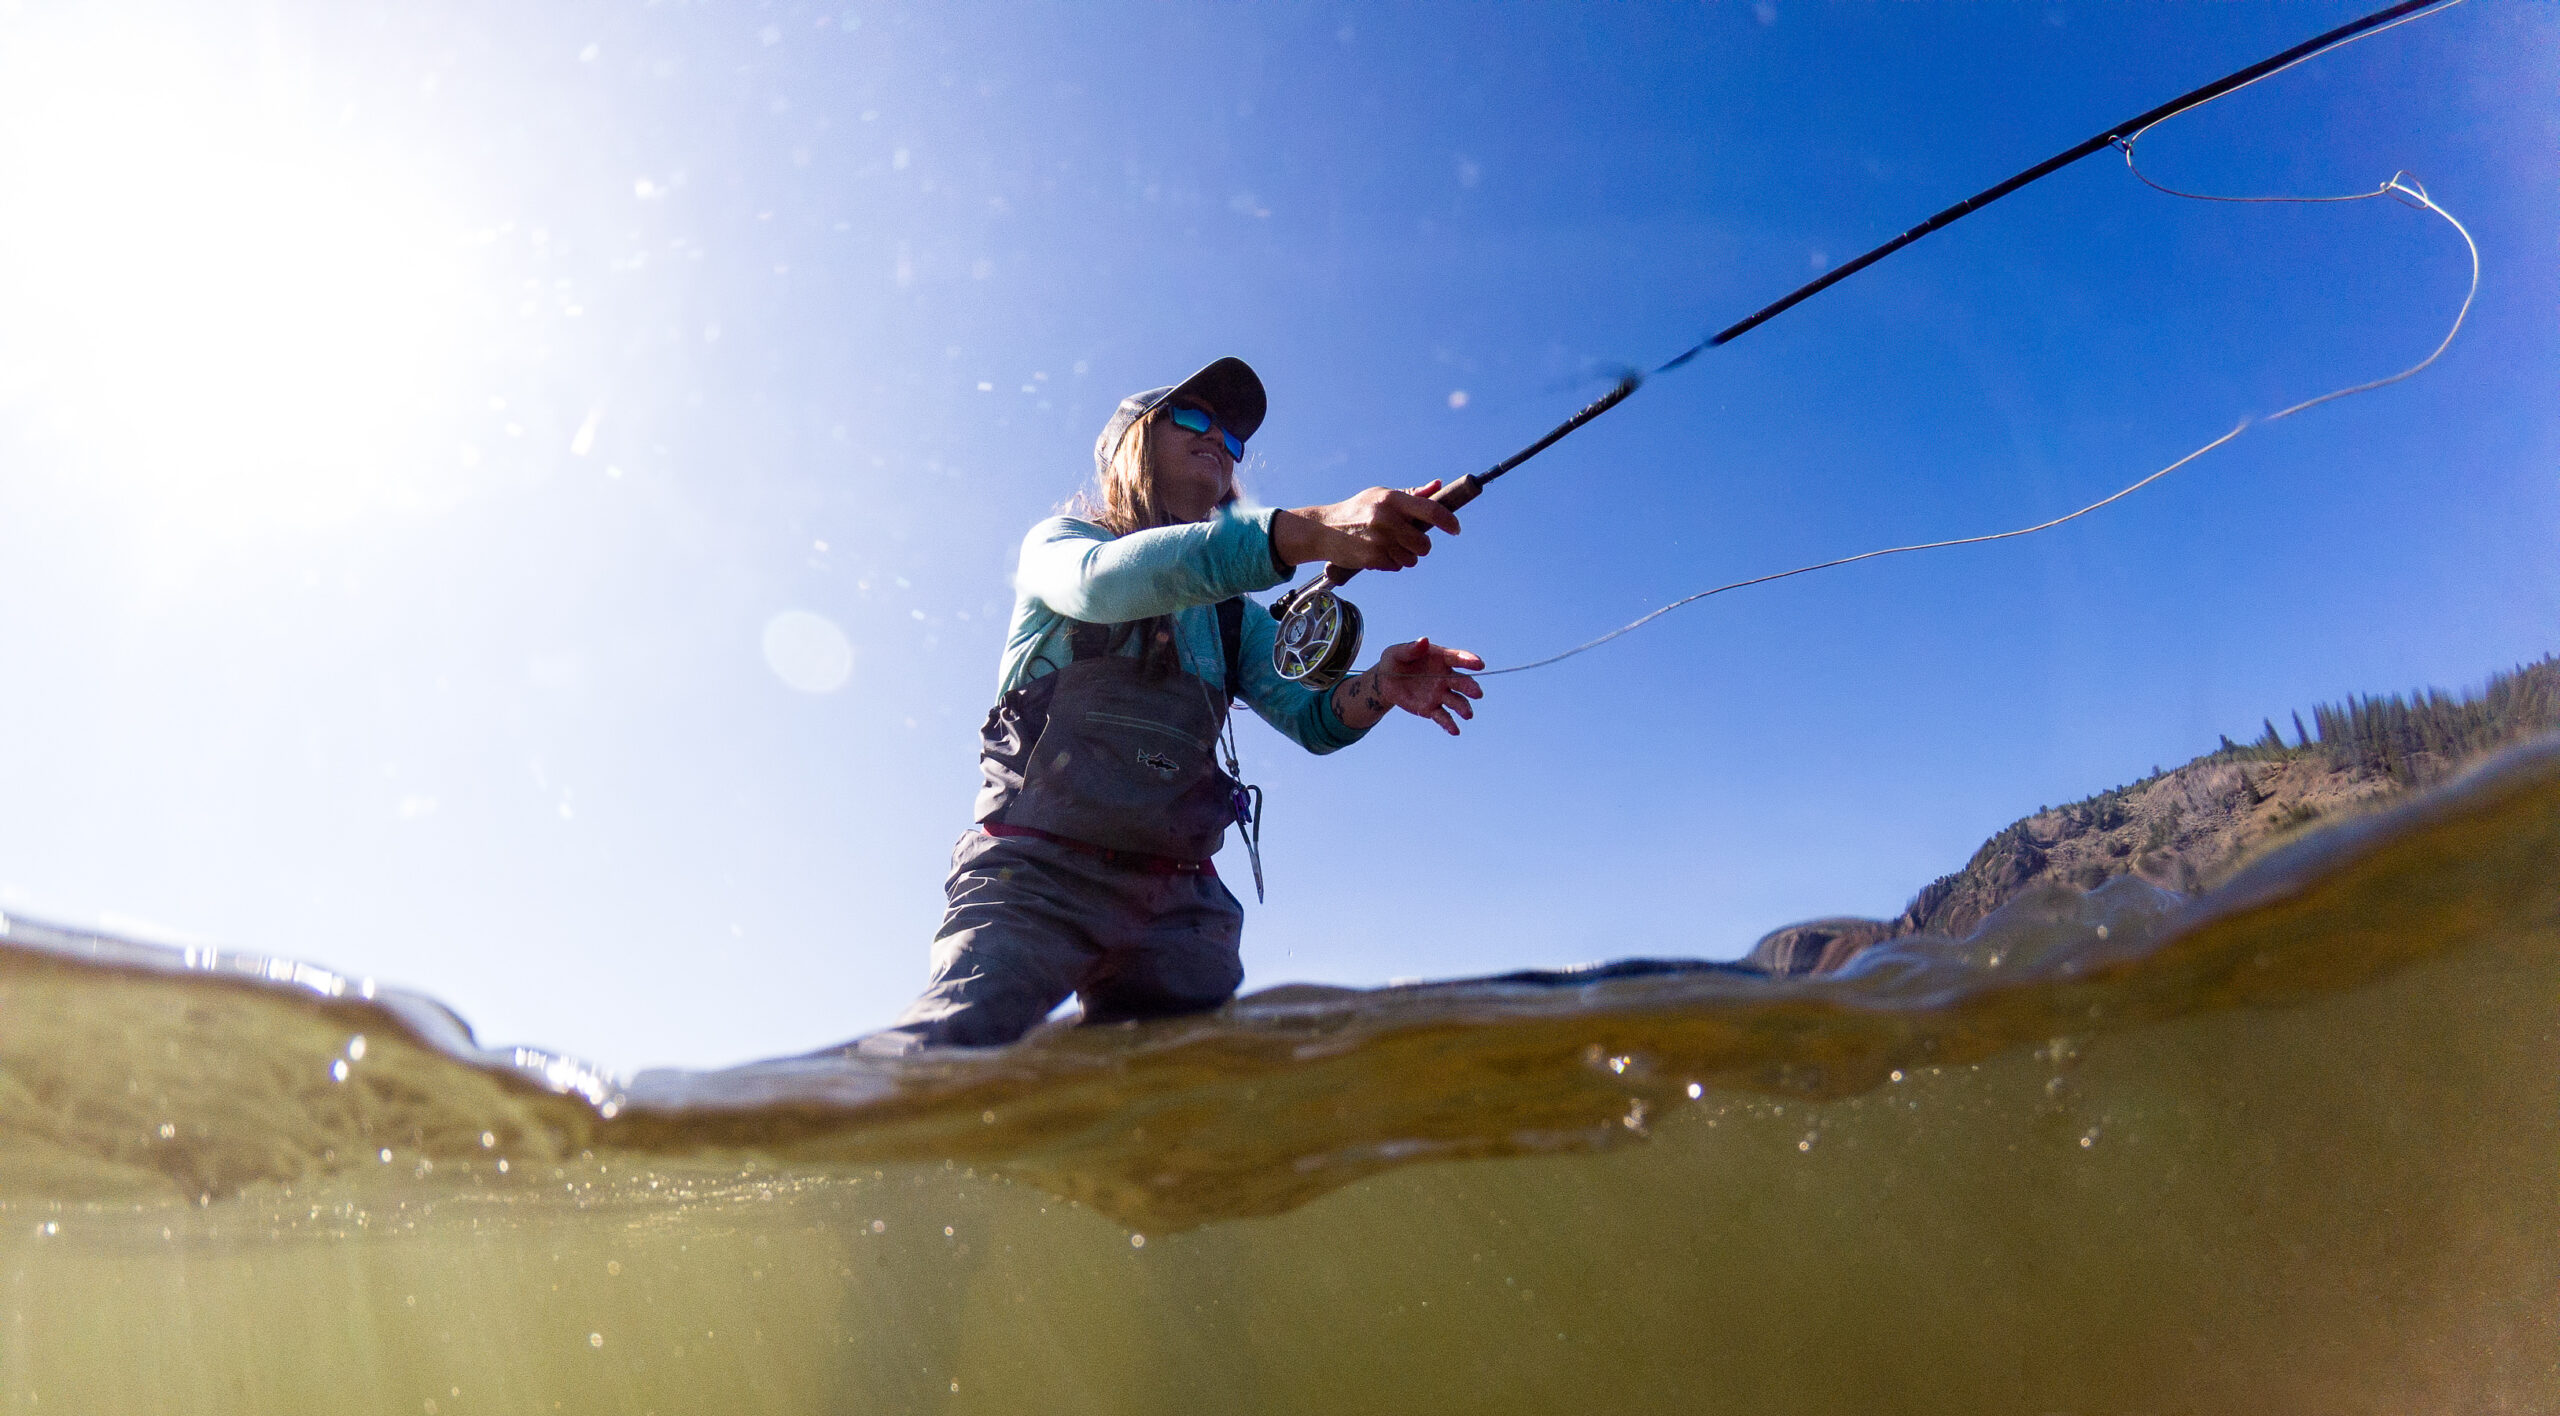 Fly Fishing Waders Buyers Guide - What Kind of Waders to Get & Why